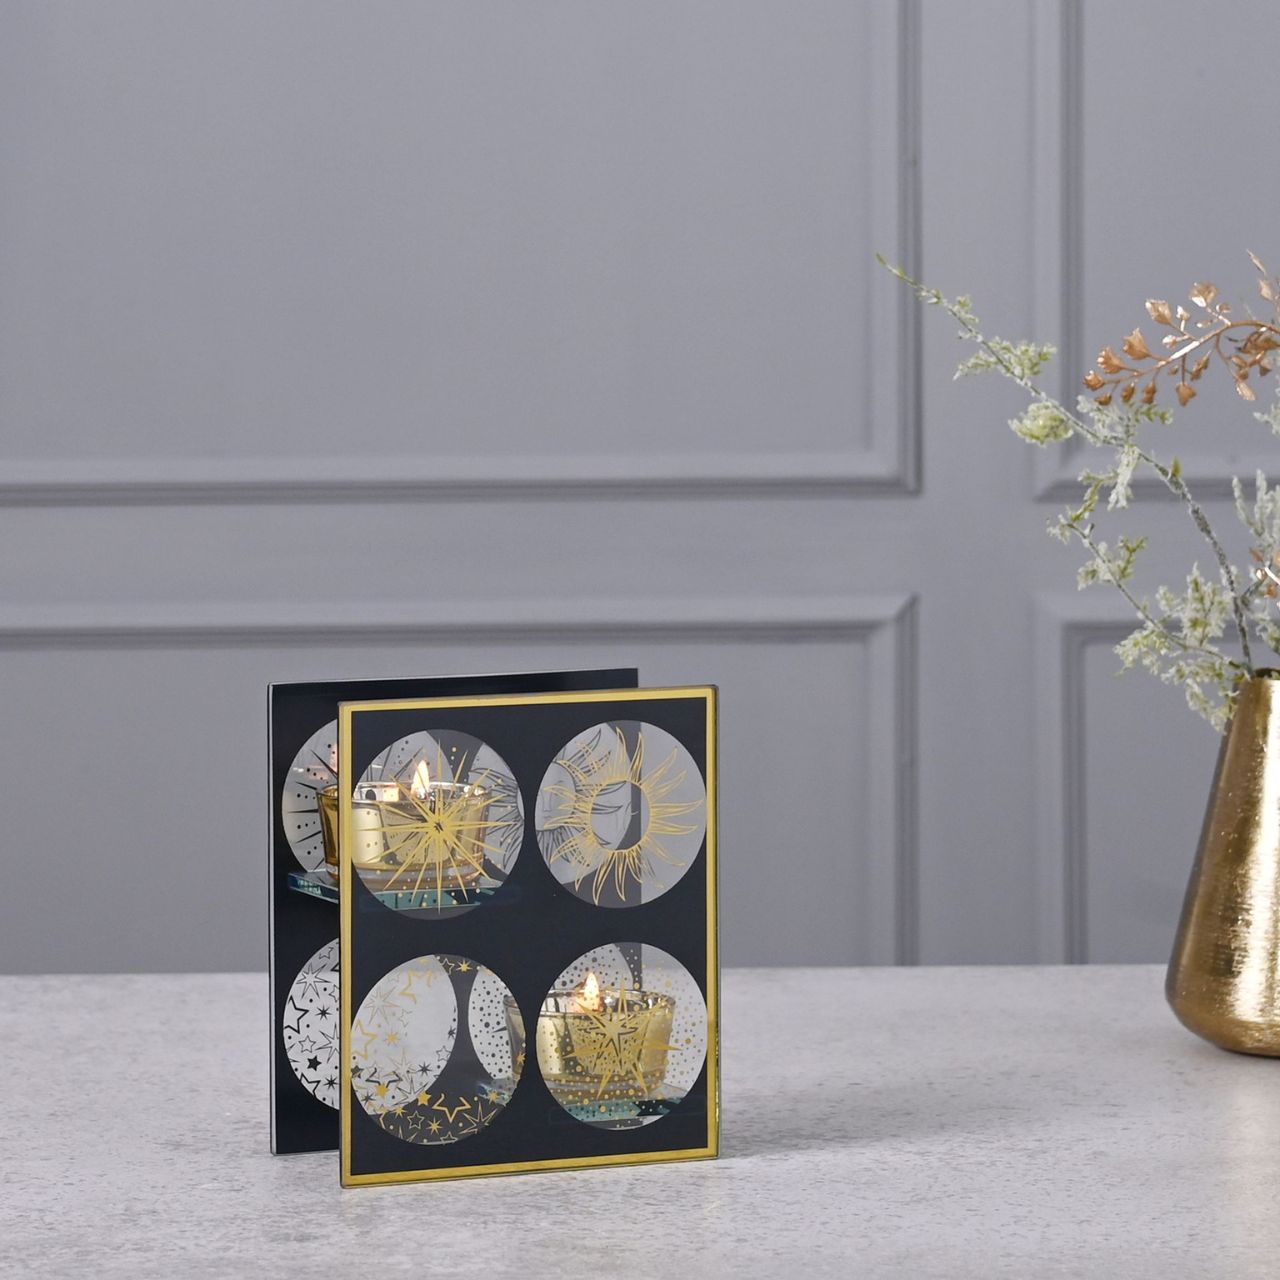 Celestial Double Tealight Holder  A celestial single glass tea light holder by THE SEASONAL GIFT CO.  This celestial tea light holder takes inspiration from the stars as it shines brightly for all to admire.